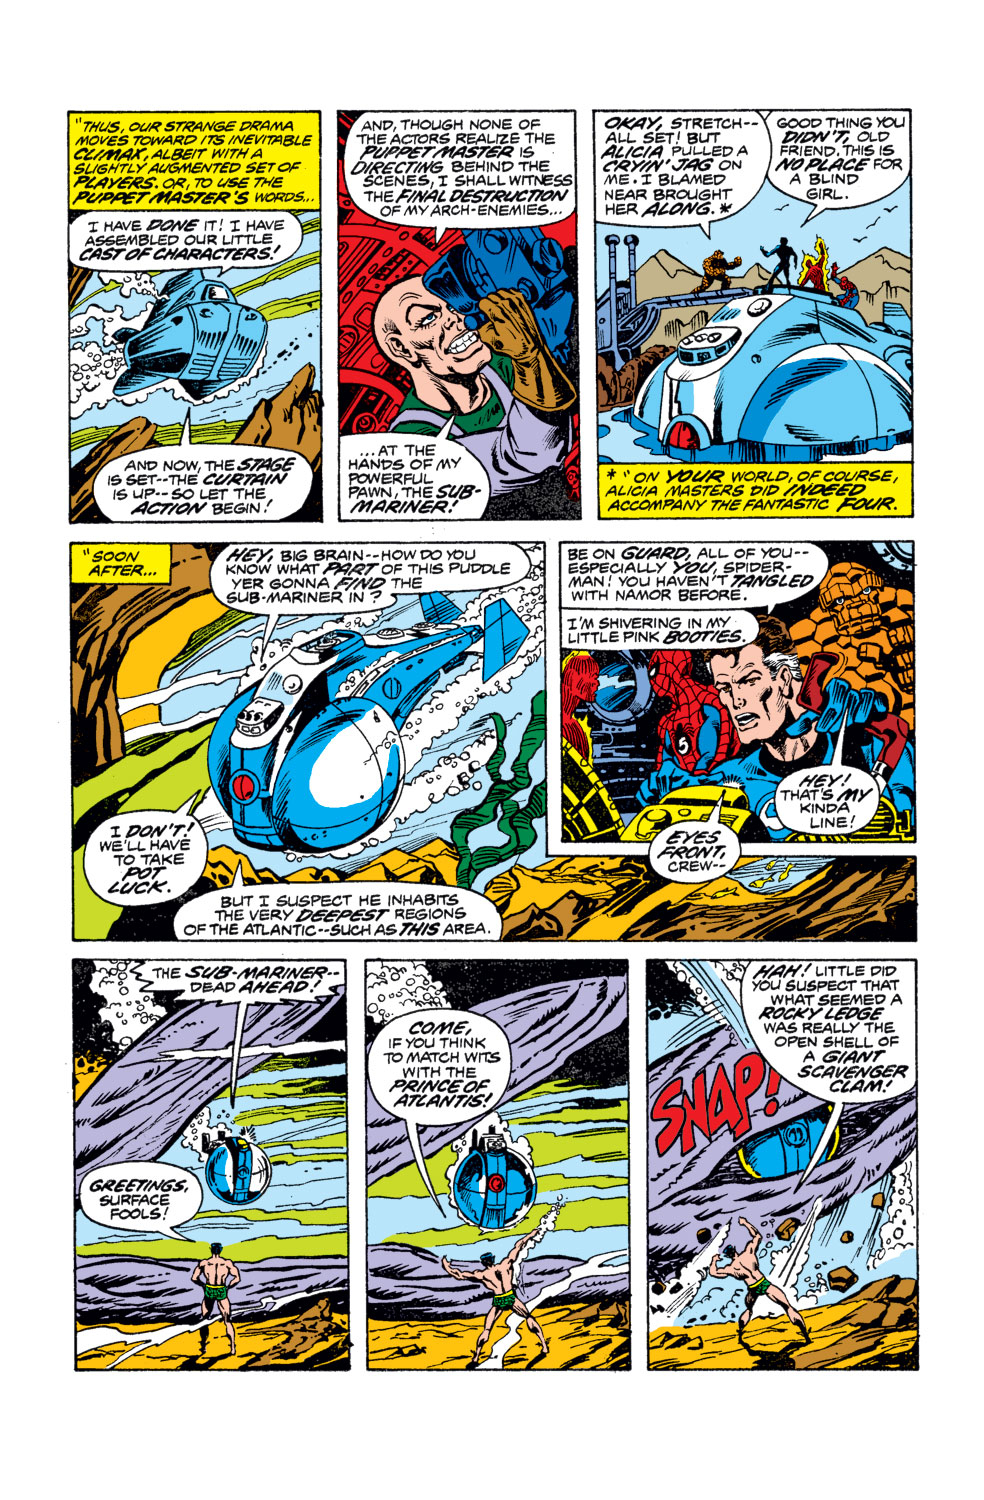 What If? (1977) issue 1 - Spider-Man joined the Fantastic Four - Page 24